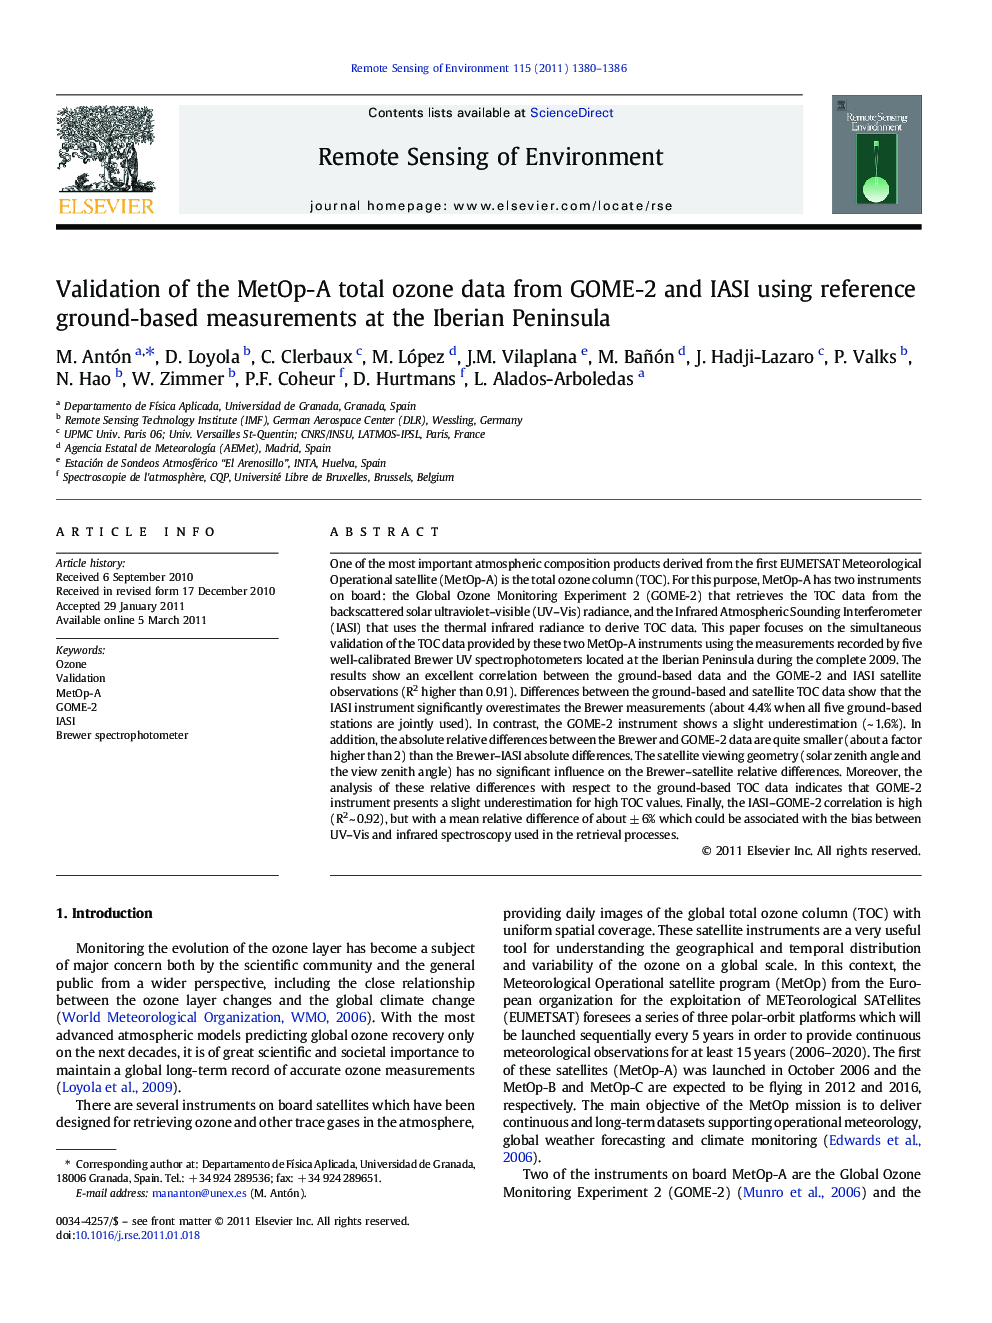 Validation of the MetOp-A total ozone data from GOME-2 and IASI using reference ground-based measurements at the Iberian Peninsula